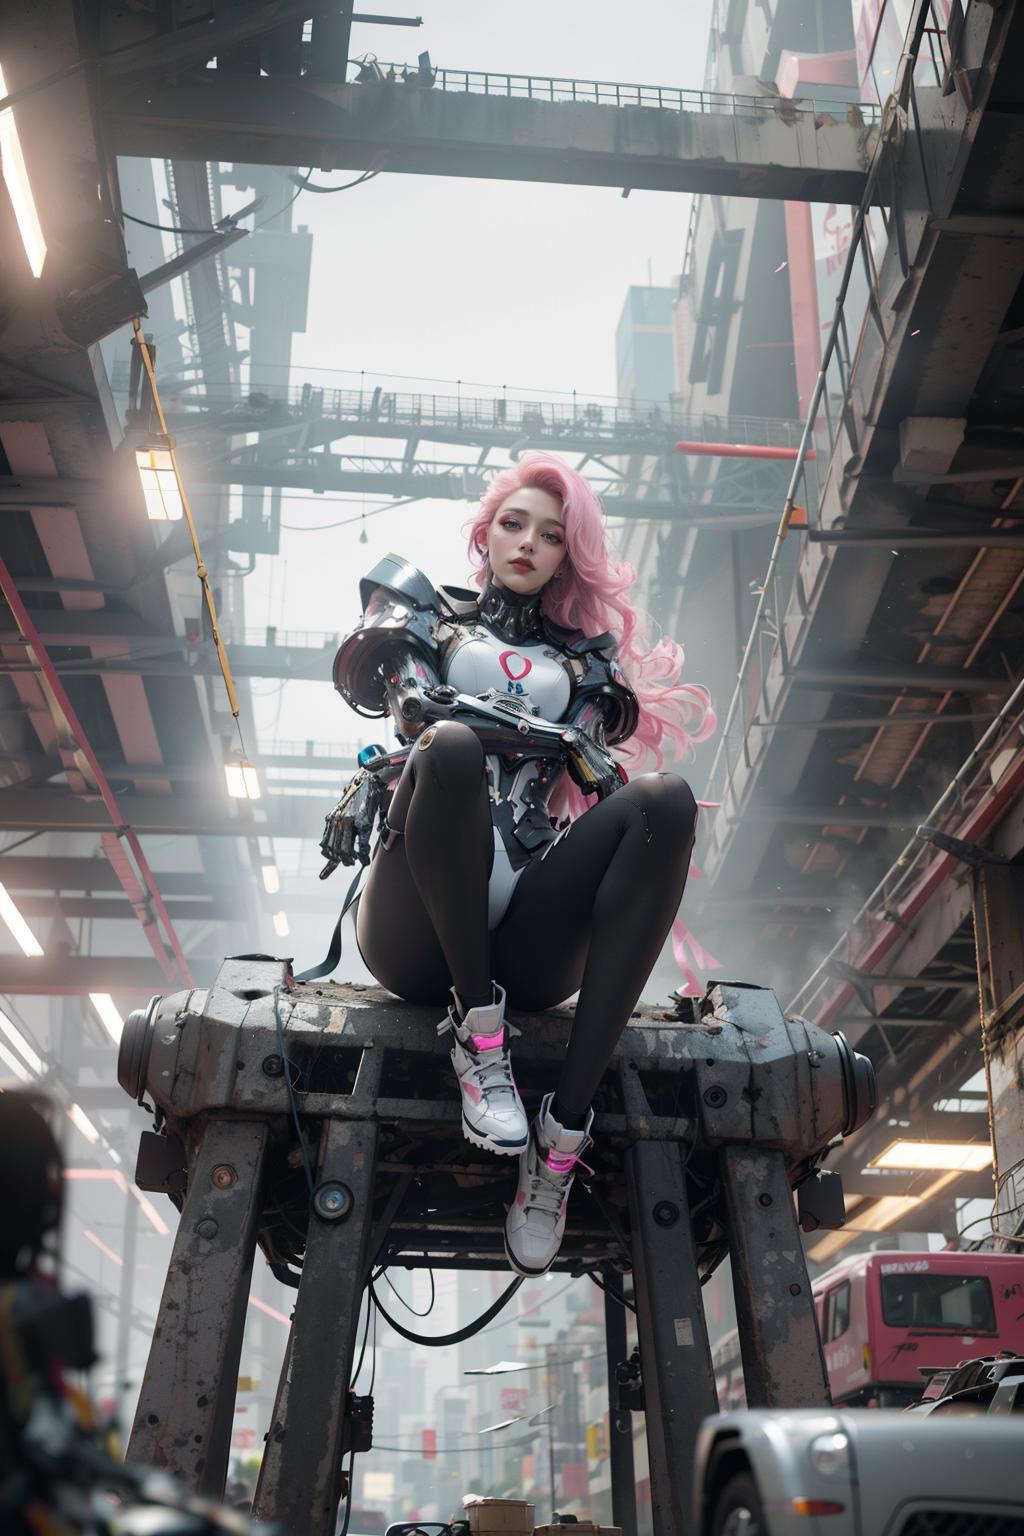 Pink-Haired Cyborg Woman Posing on a Machine in an Industrial Setting